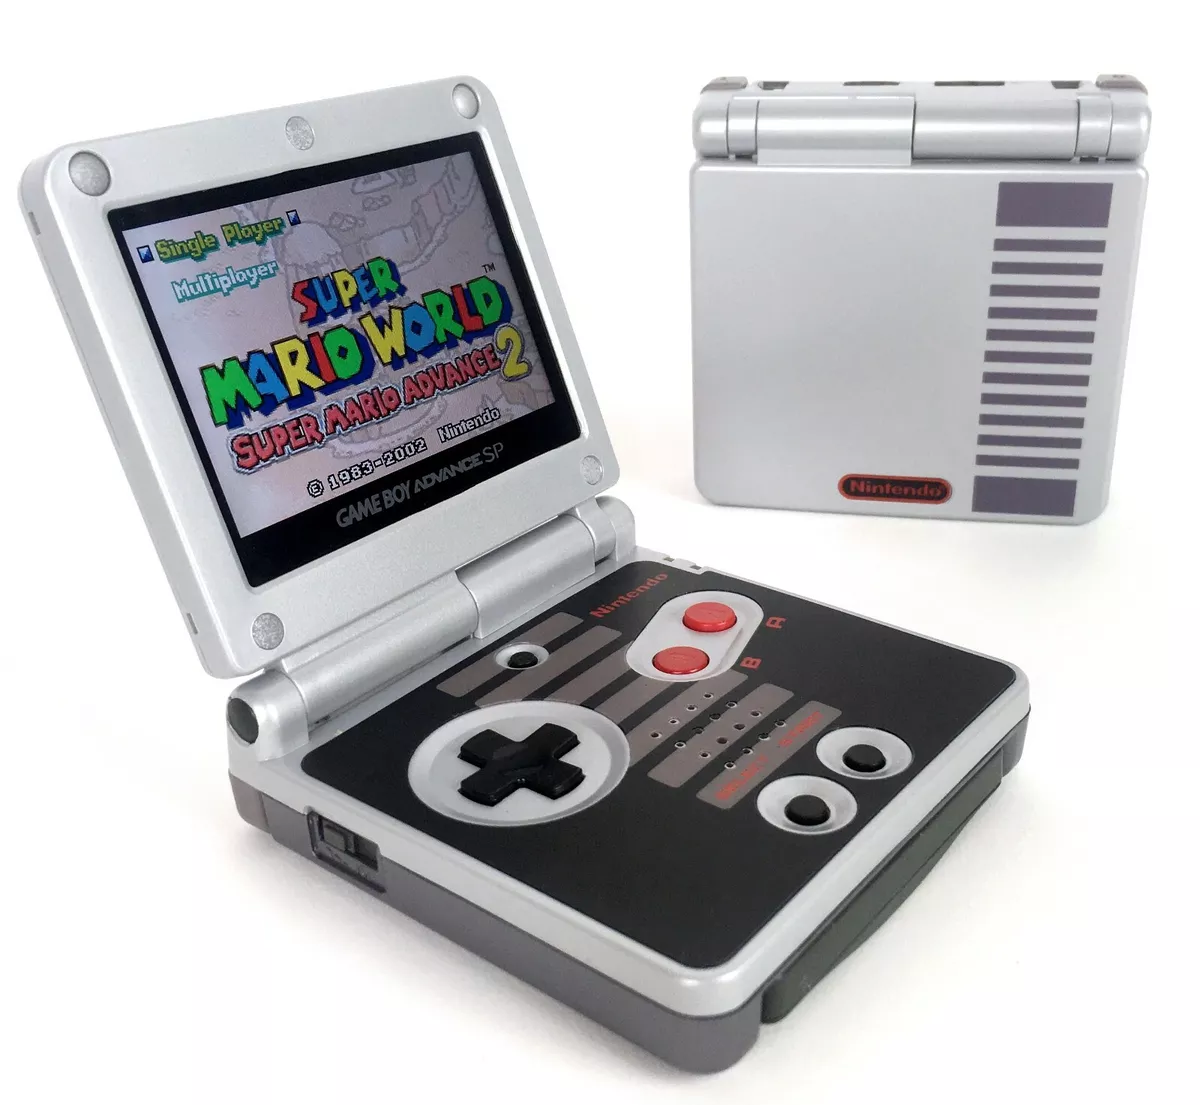 Gameboy Advance SP FunnyPlaying IPS 3.0 LCD Backlit Console PICK A COLOR  GBASP